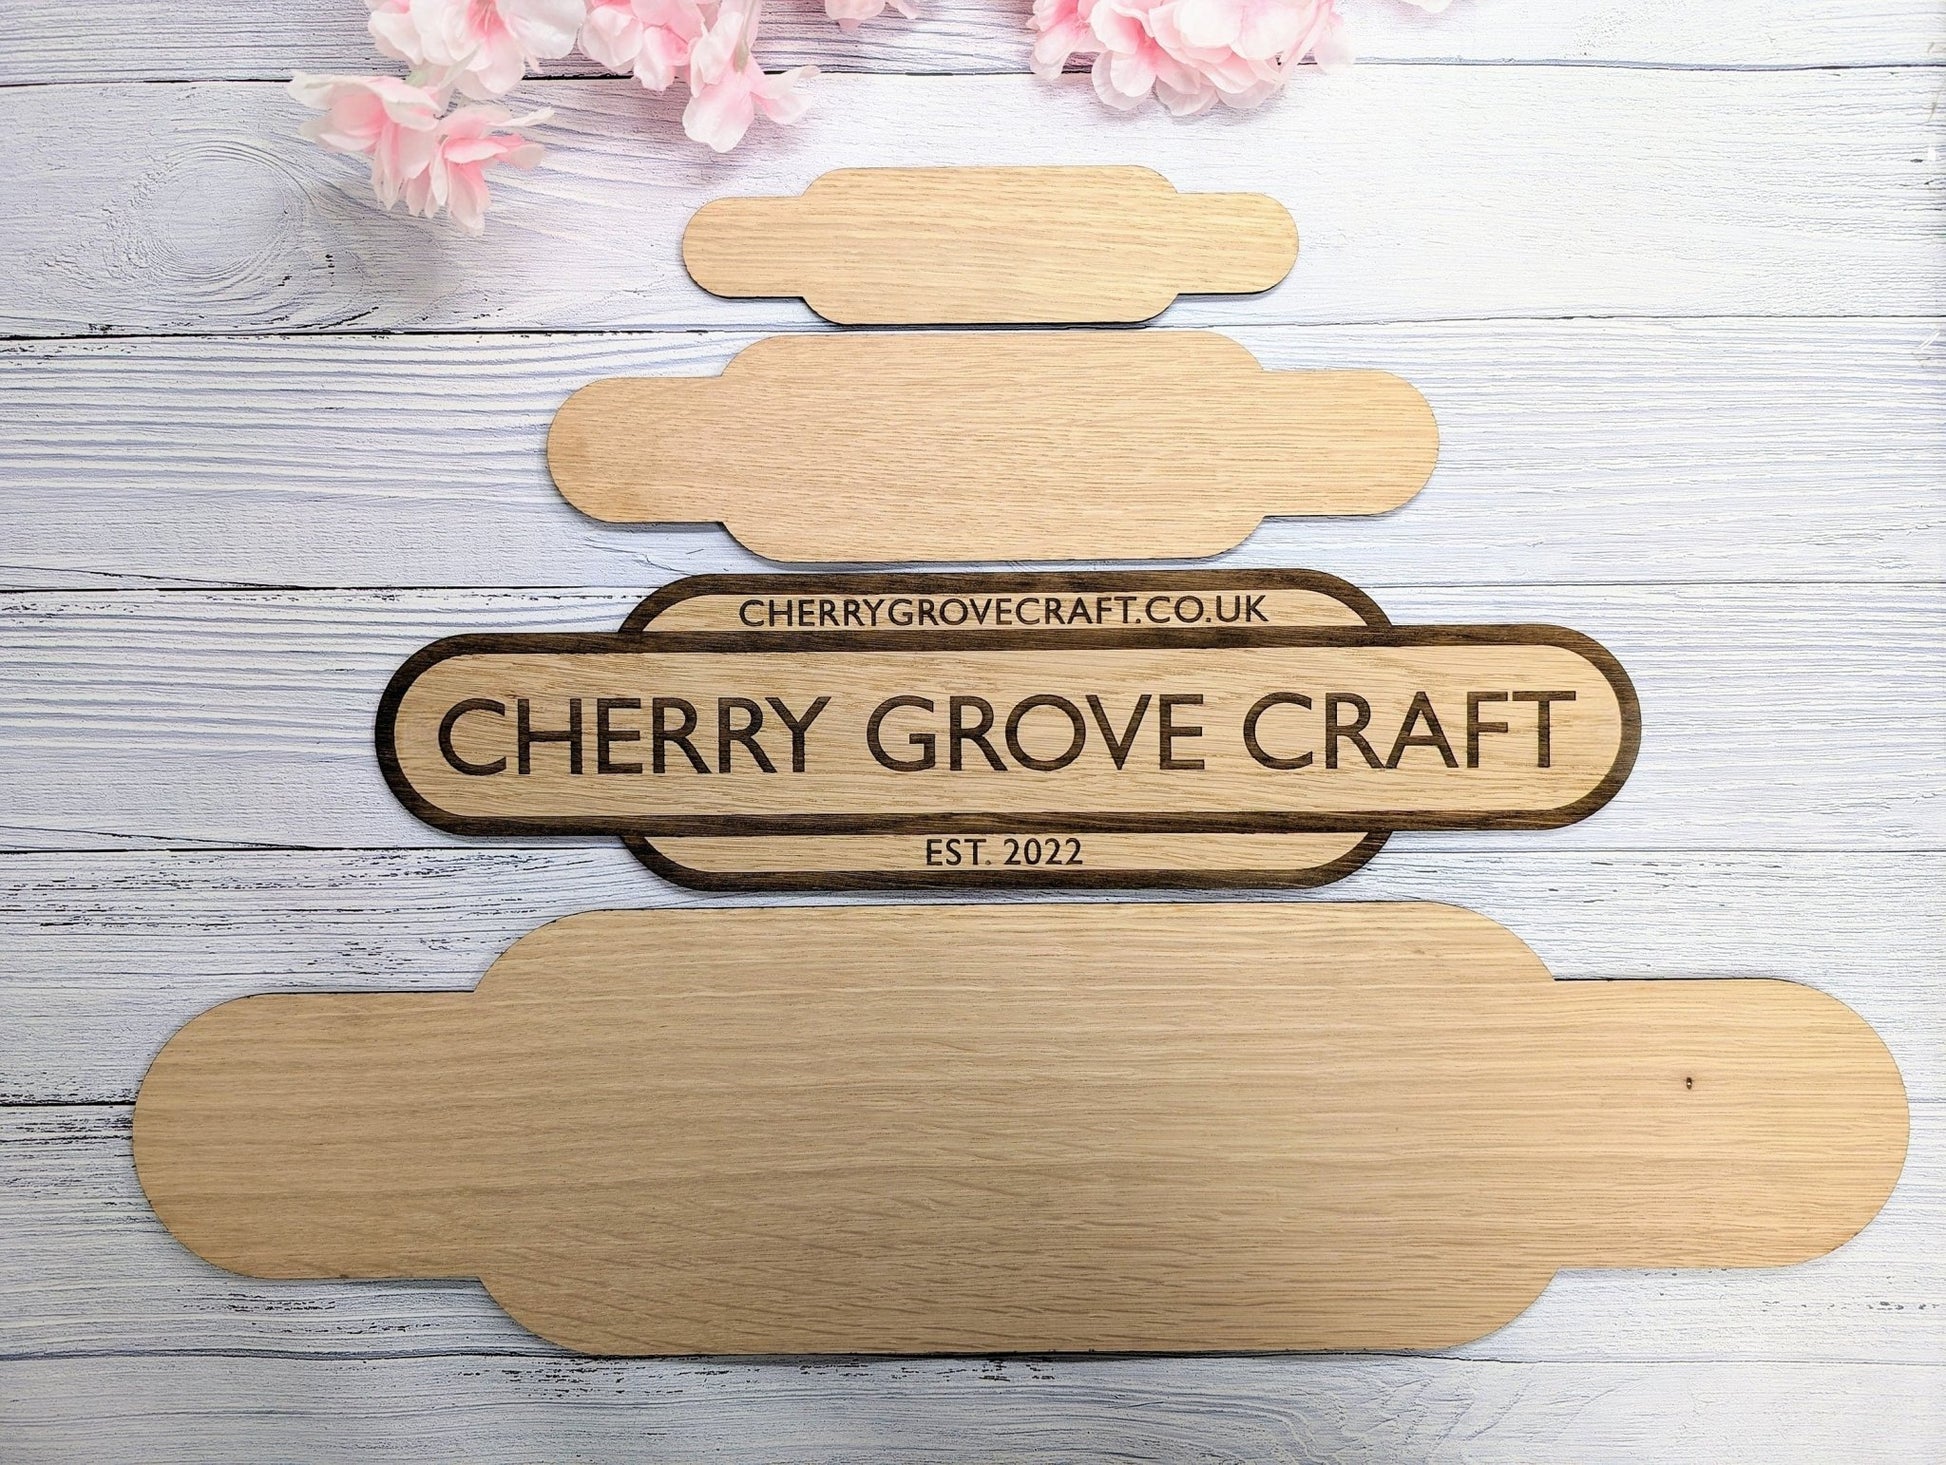 Personalised Railway Station Business Name Door Sign - Indoor Use - Oak MDF - Customisable Text, 4 Sizes - Eco-Friendly, British Rail - CherryGroveCraft